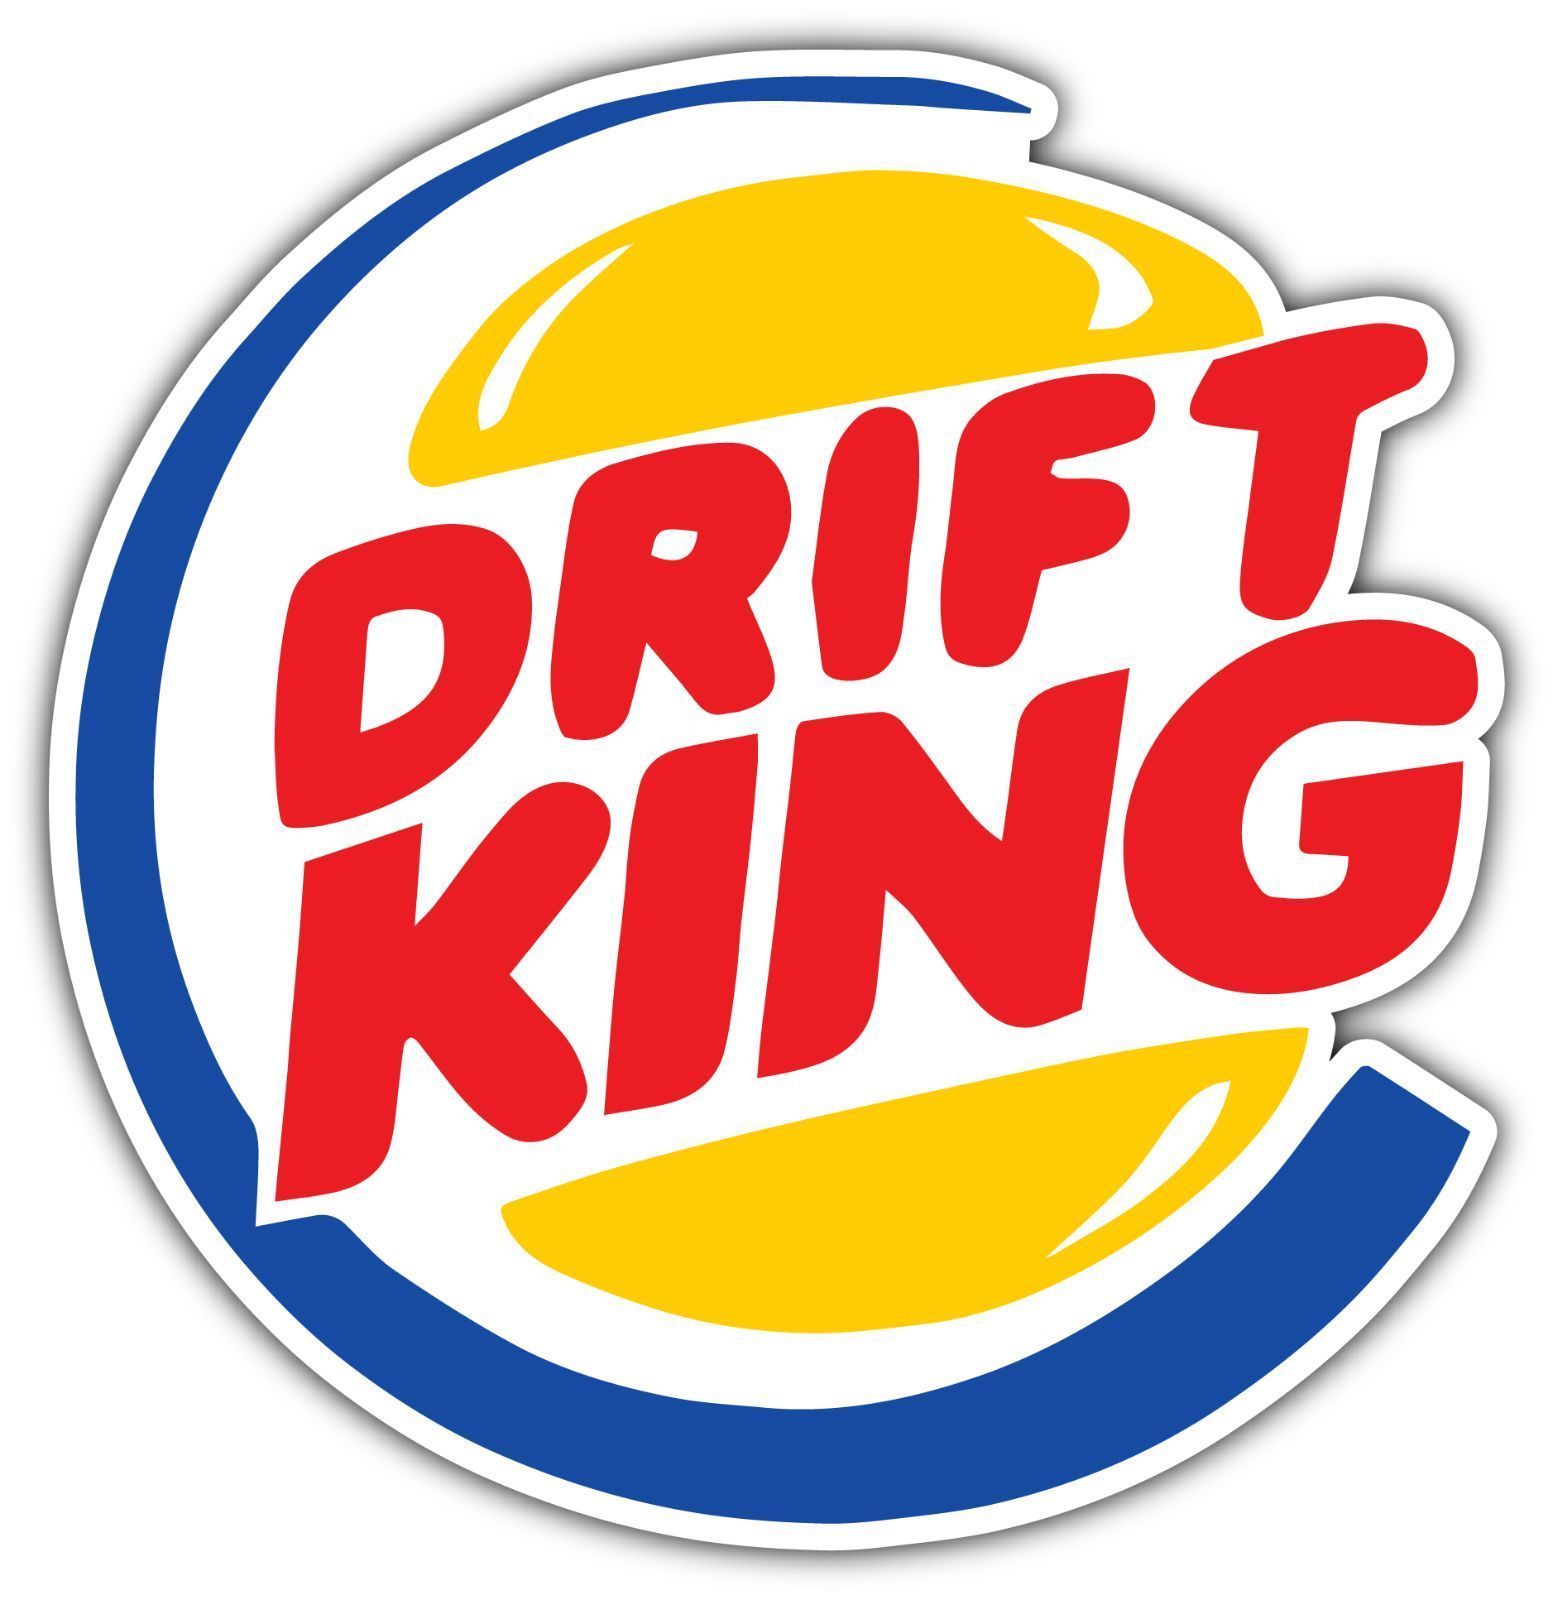 Details about Drift King Racing Cars Funny Car Bumper Vinyl Sticker Decal 4.6